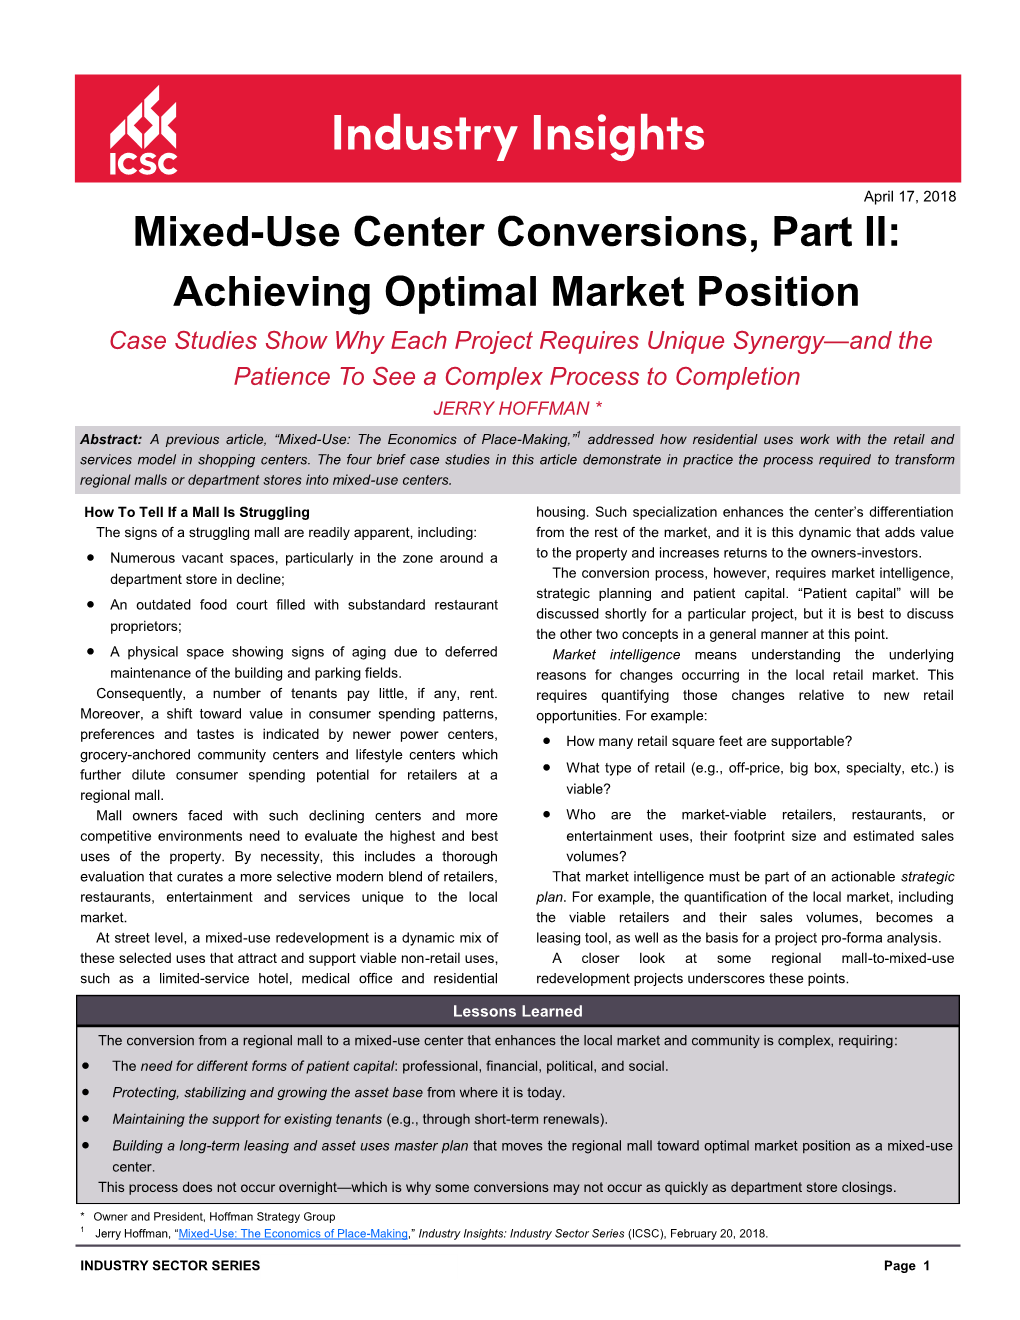 Mixed-Use Center Conversions, Part II